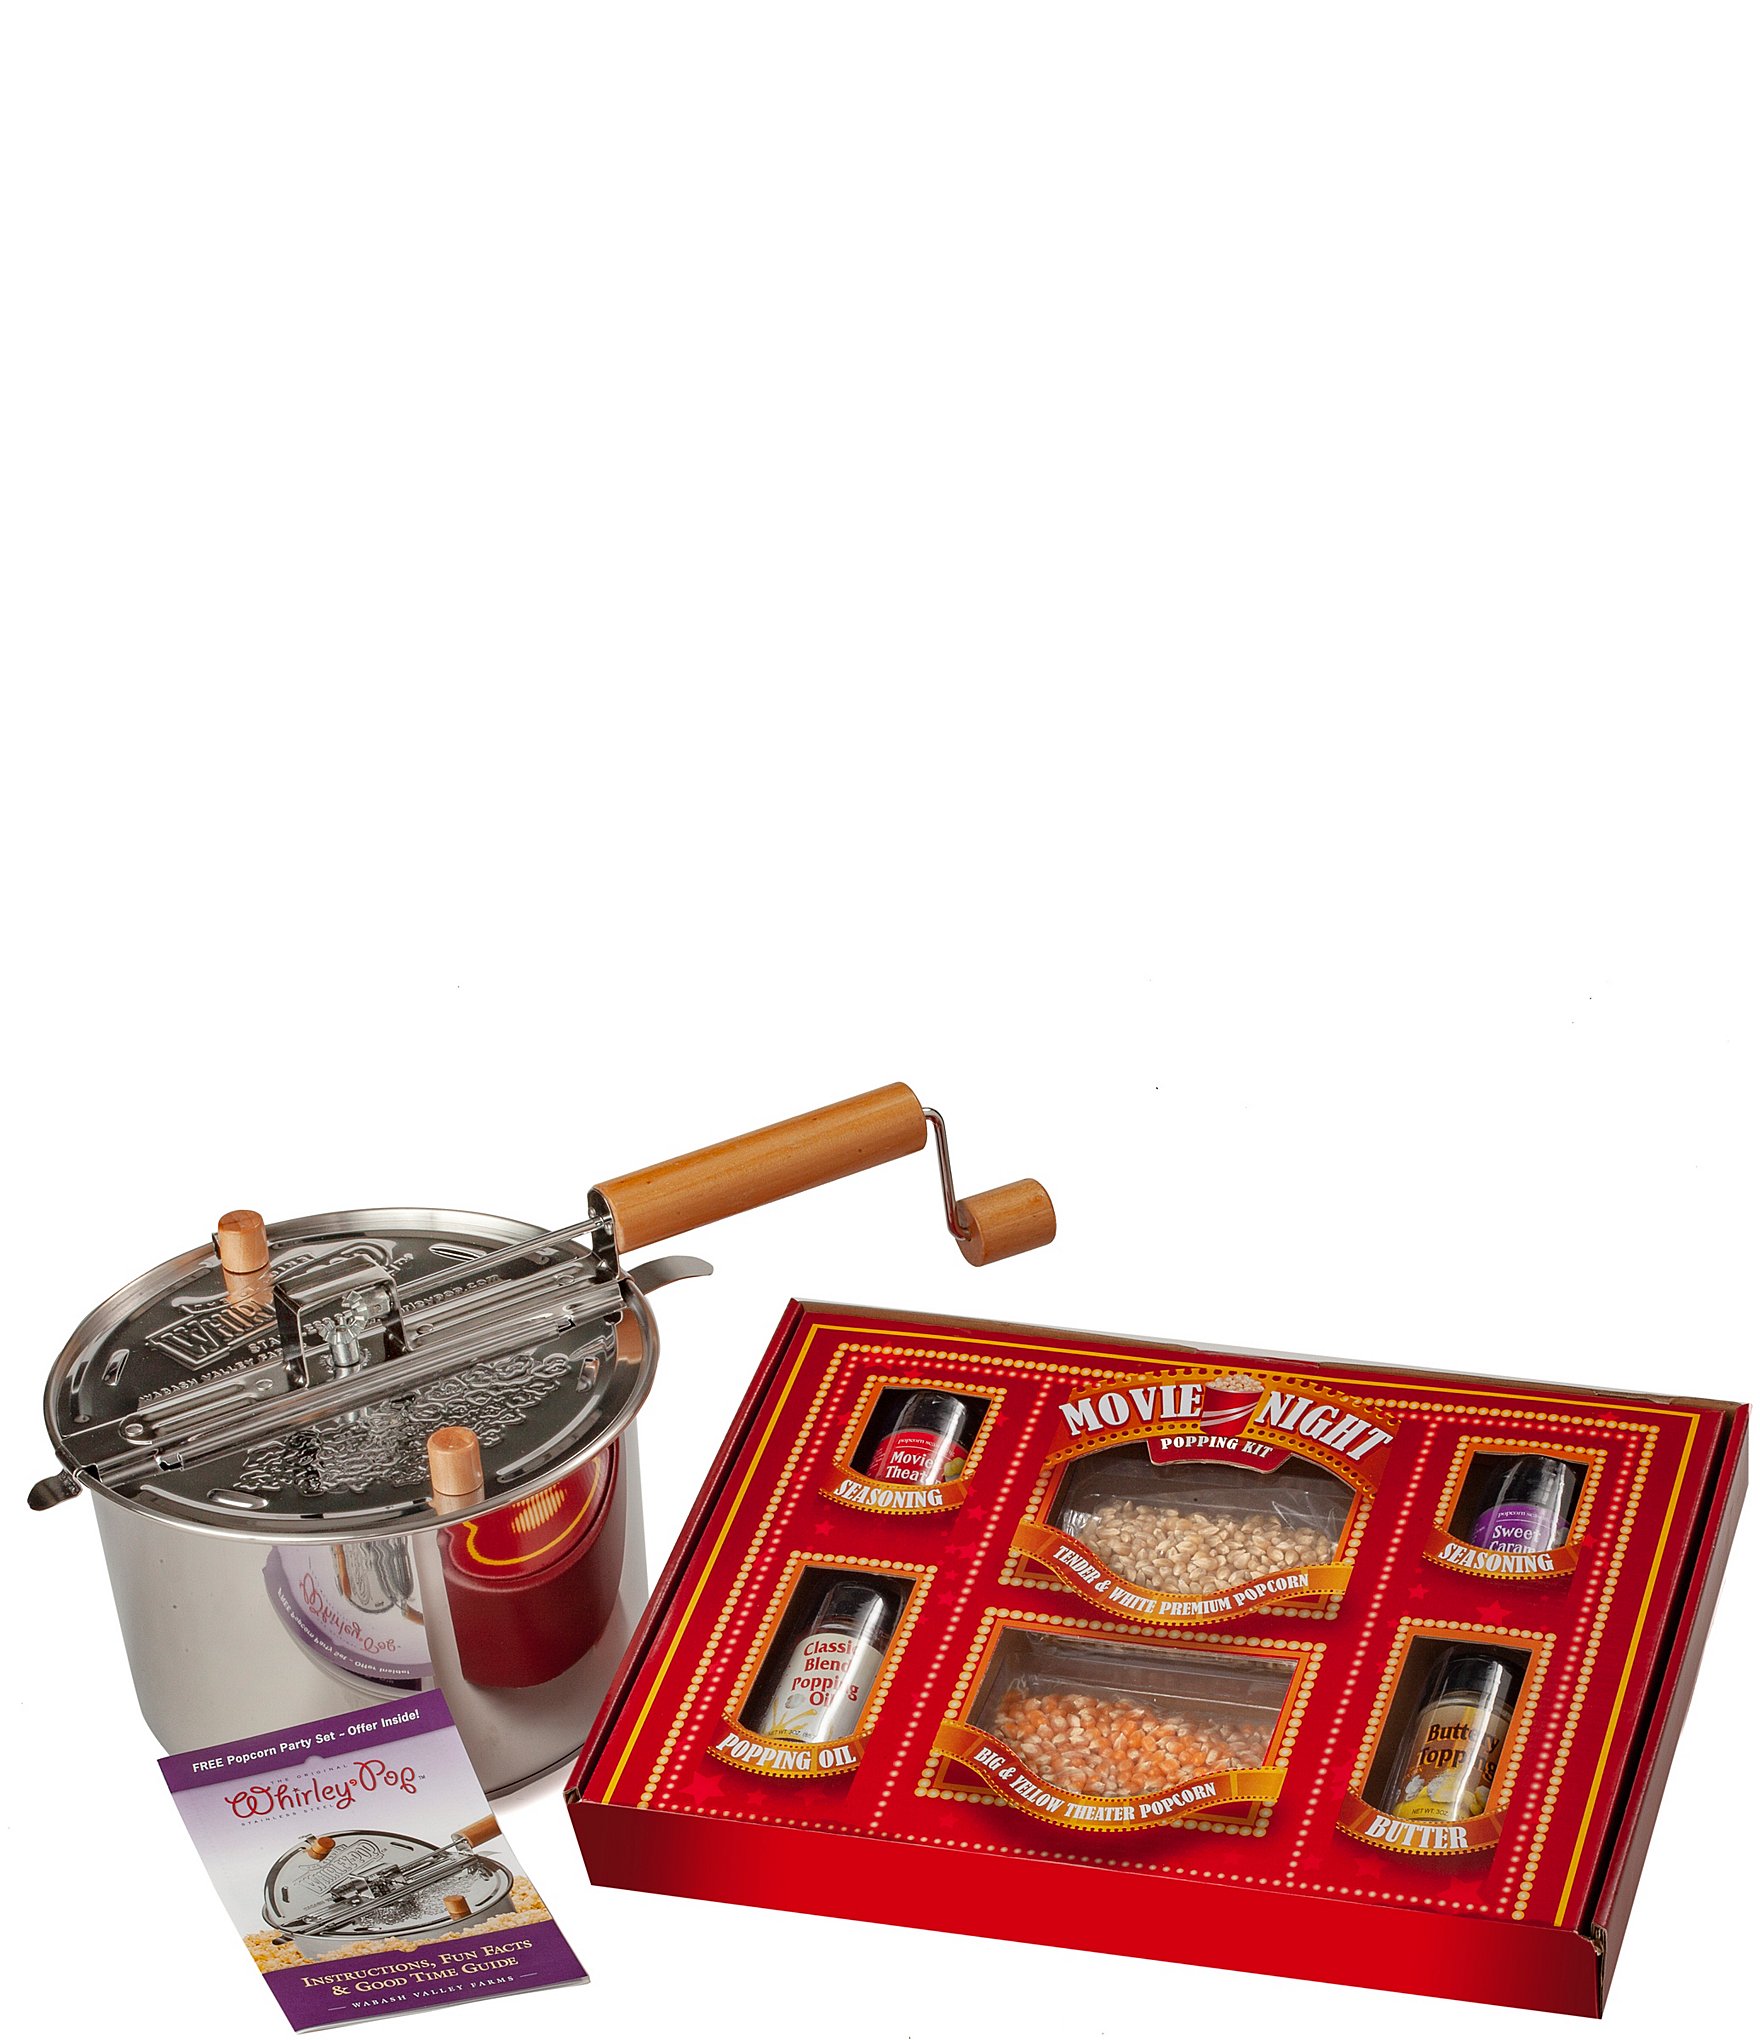 https://dimg.dillards.com/is/image/DillardsZoom/zoom/wabash-valley-farms-stainless-steel-whirley-pop-and-mini-vintage-movie-night-marque-gift-set/20115404_zi.jpg